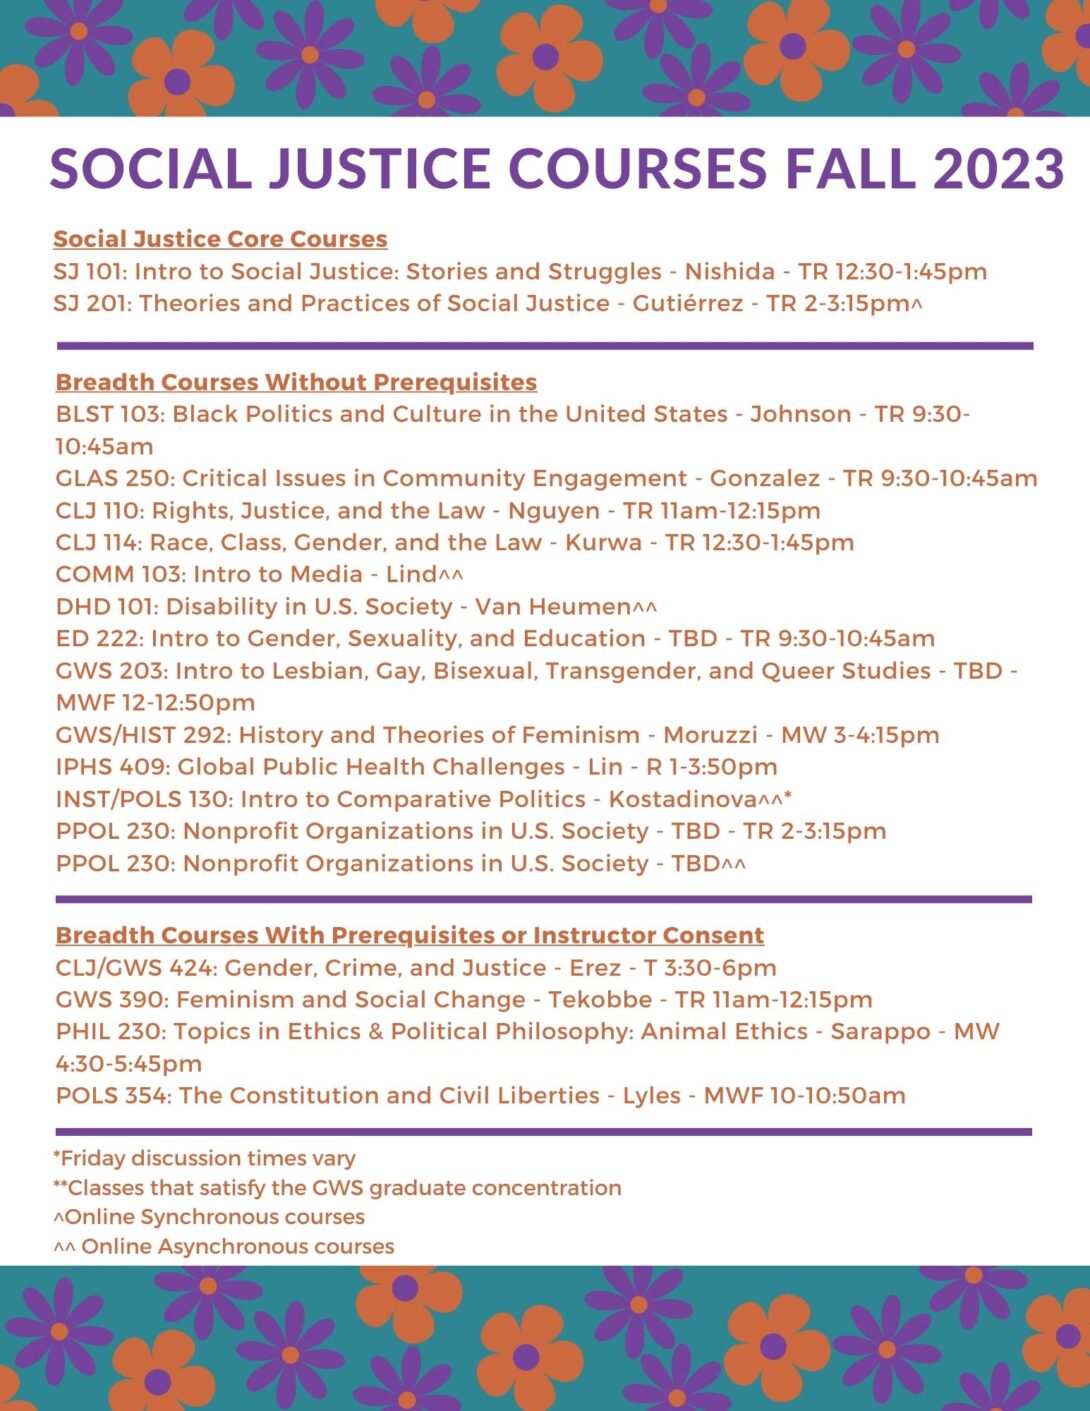 Small orange and purple flowers over a teal background form a border at the top and bottom of the flier. Social Justice courses are listed in orange and purple text.